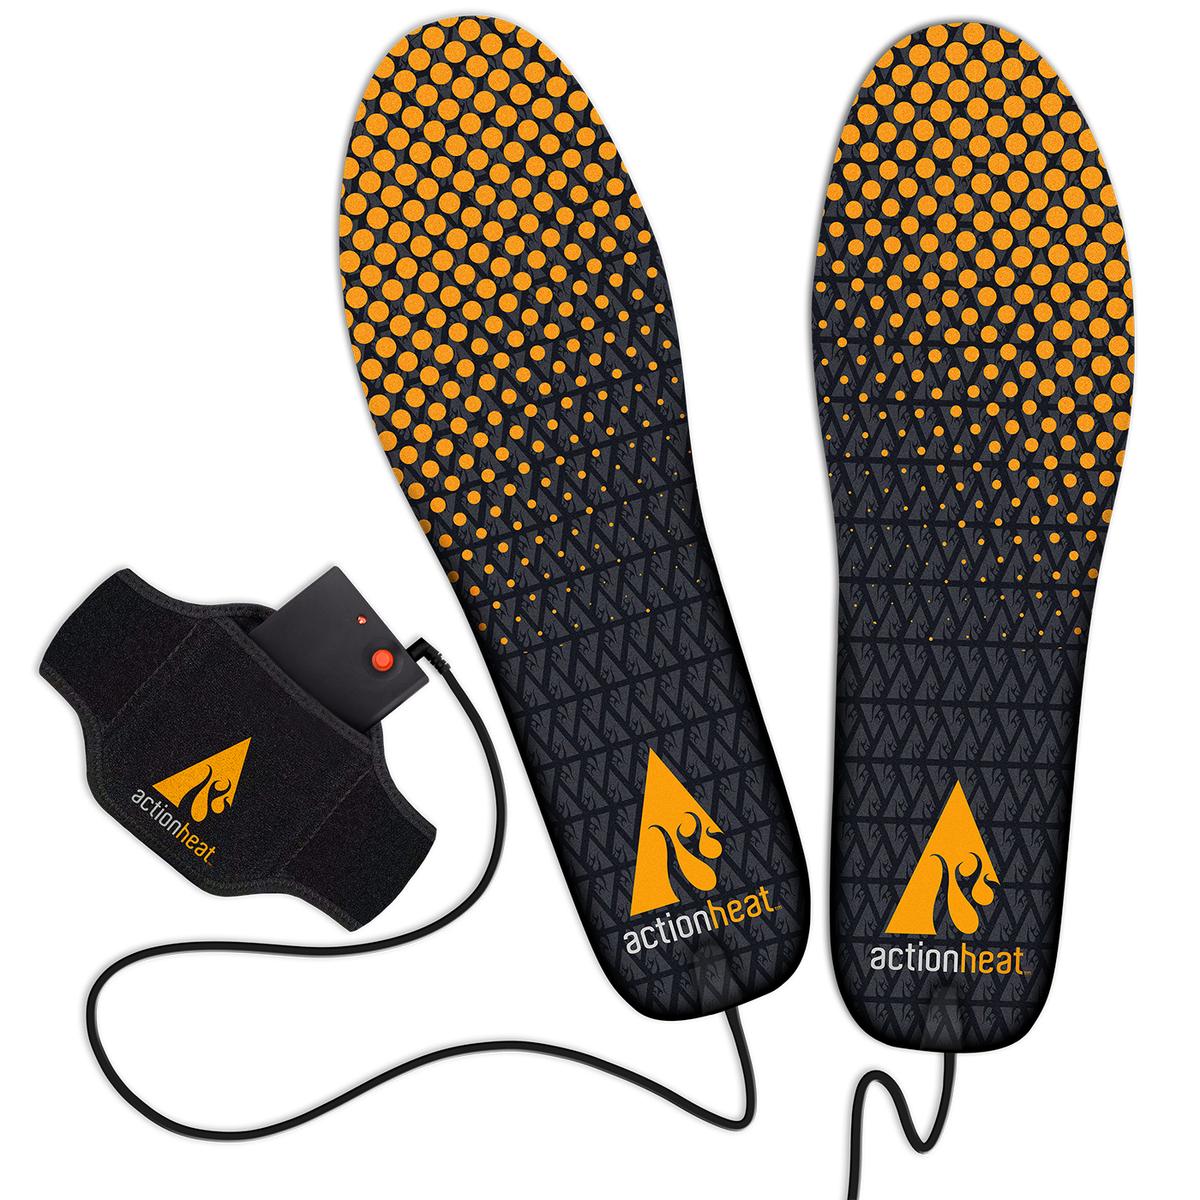 ActionHeat AA Battery Heated Insoles - Heated